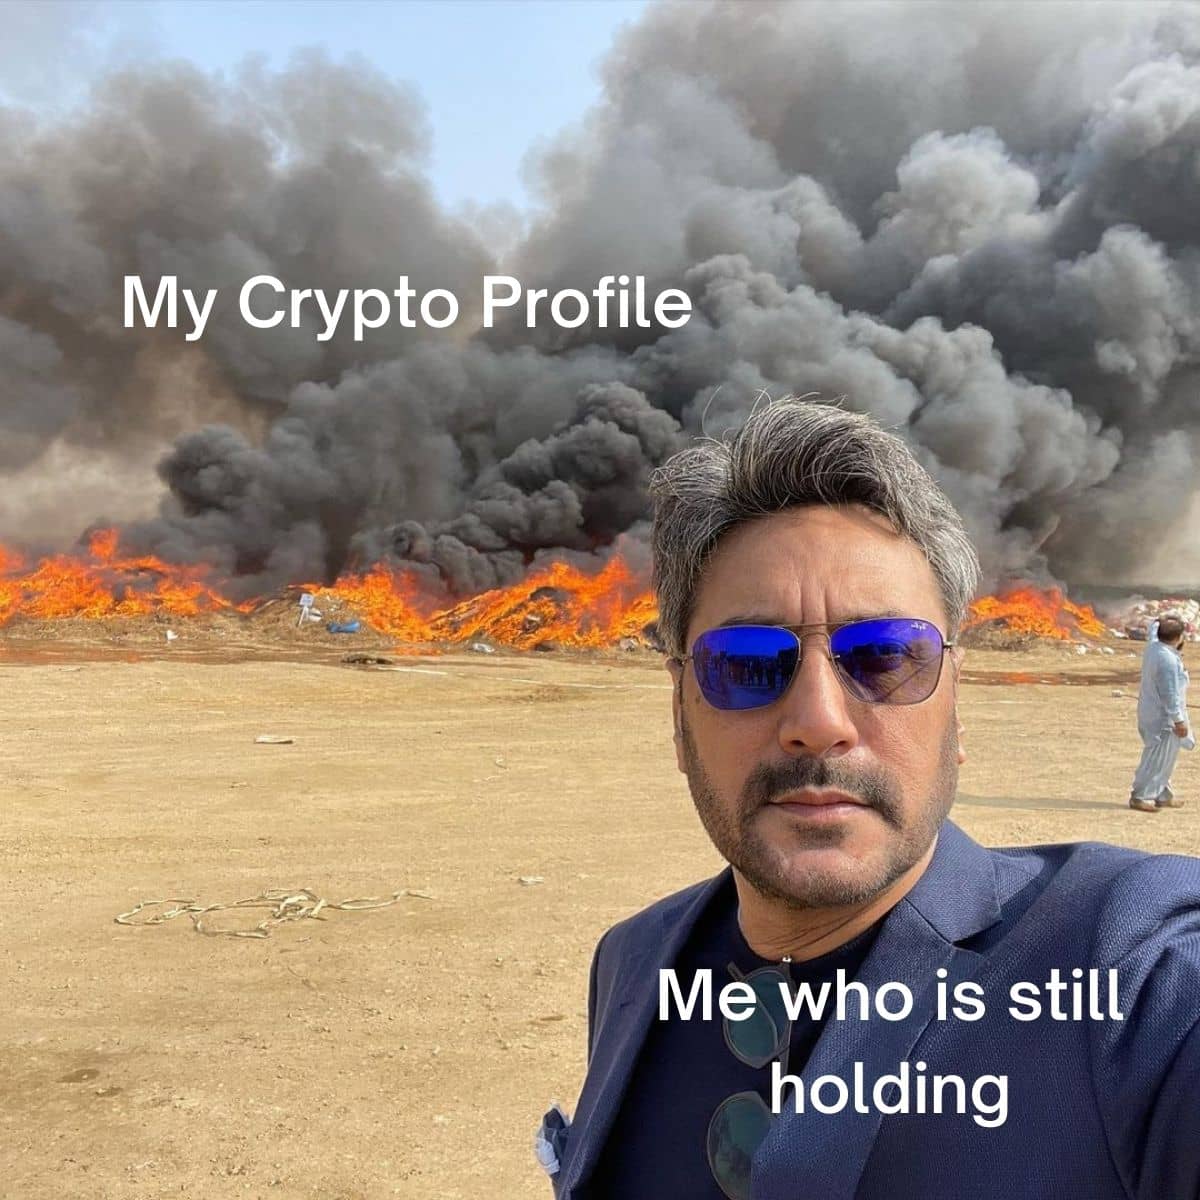 Relate much, #HODLers? 
#themcryptofeels